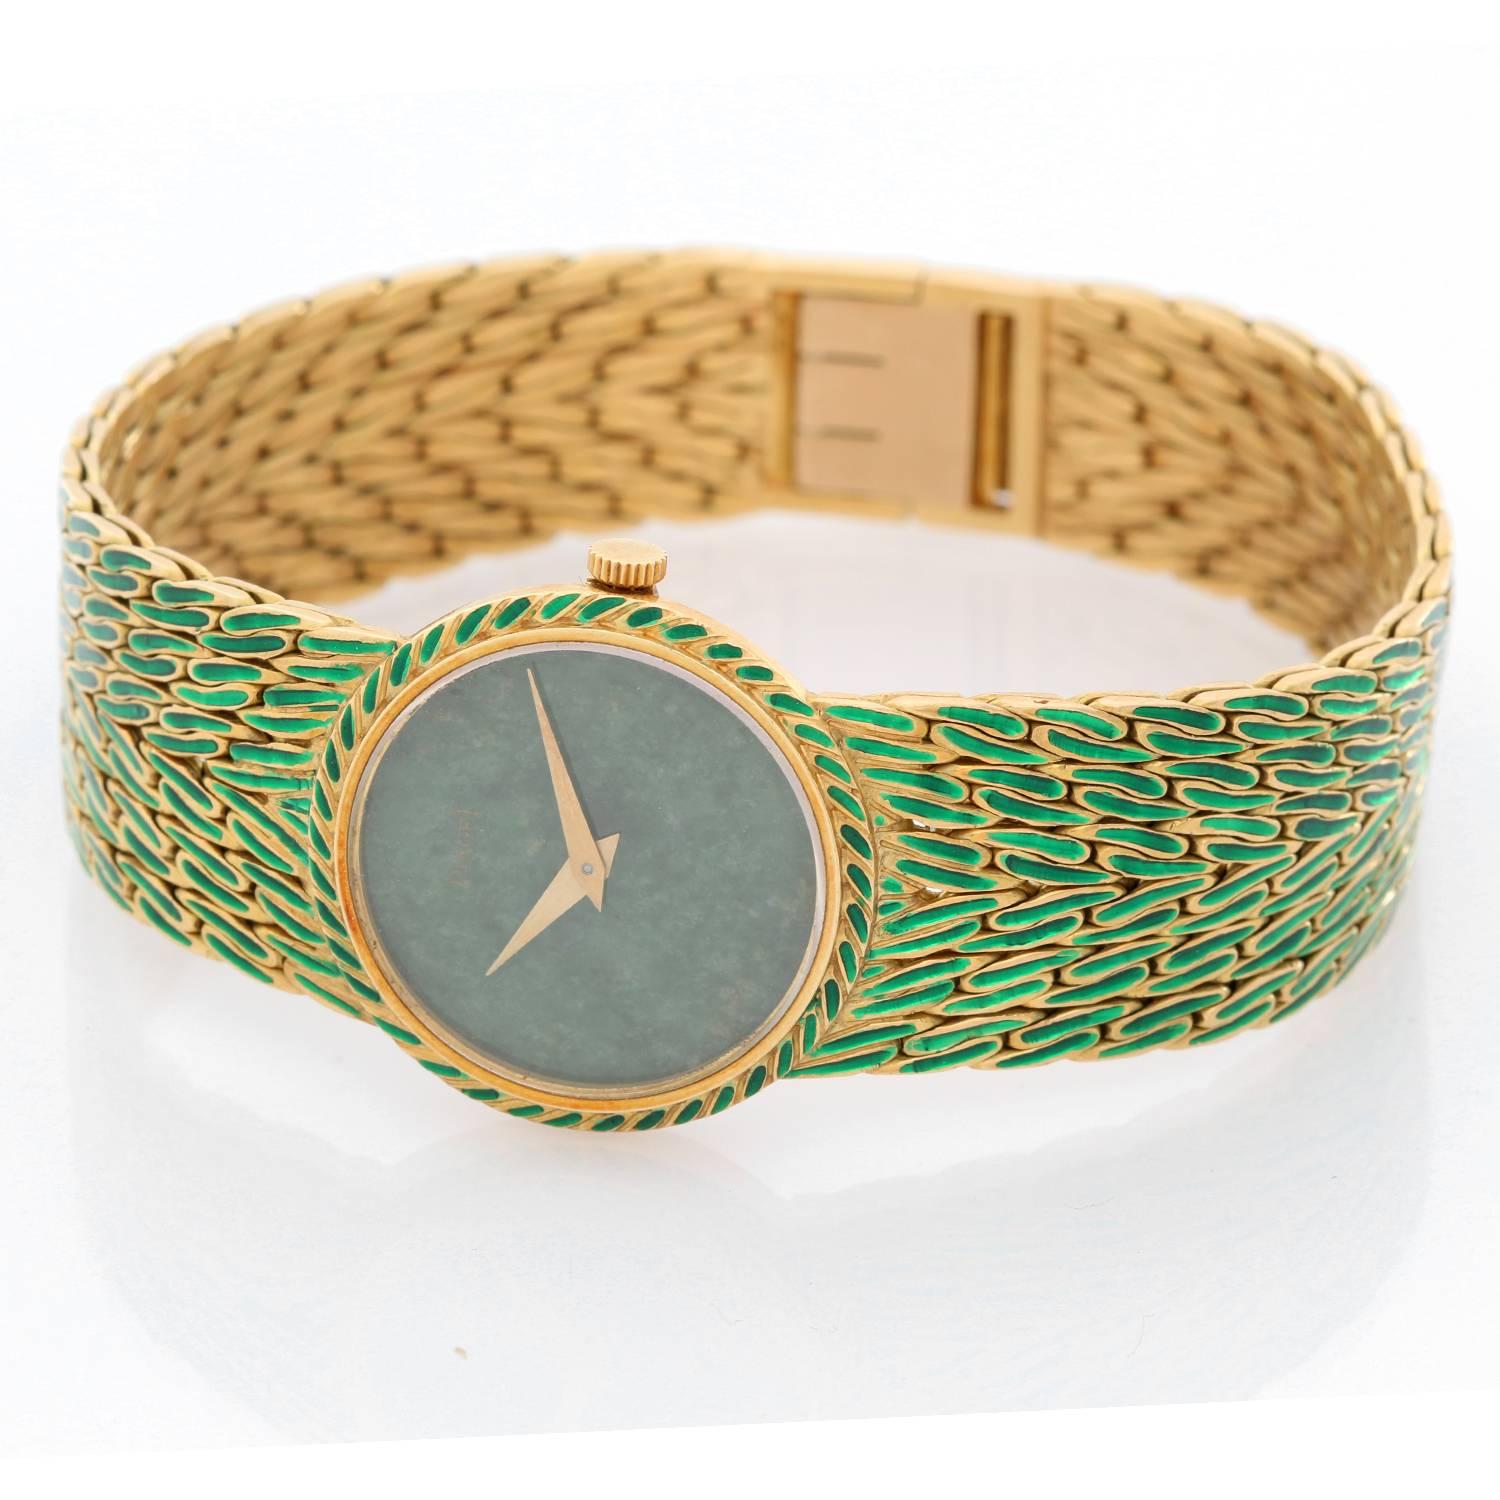 Piaget Dancer Vintage Dress Jade Watch - Manual winding. 18K Yellow Gold ( 24 mm ). Jade. 18K Yellow Gold peacock link bracelet. Pre-owned with custom box. Wrist size 6.75 inch. Total weight 58.8 grams.